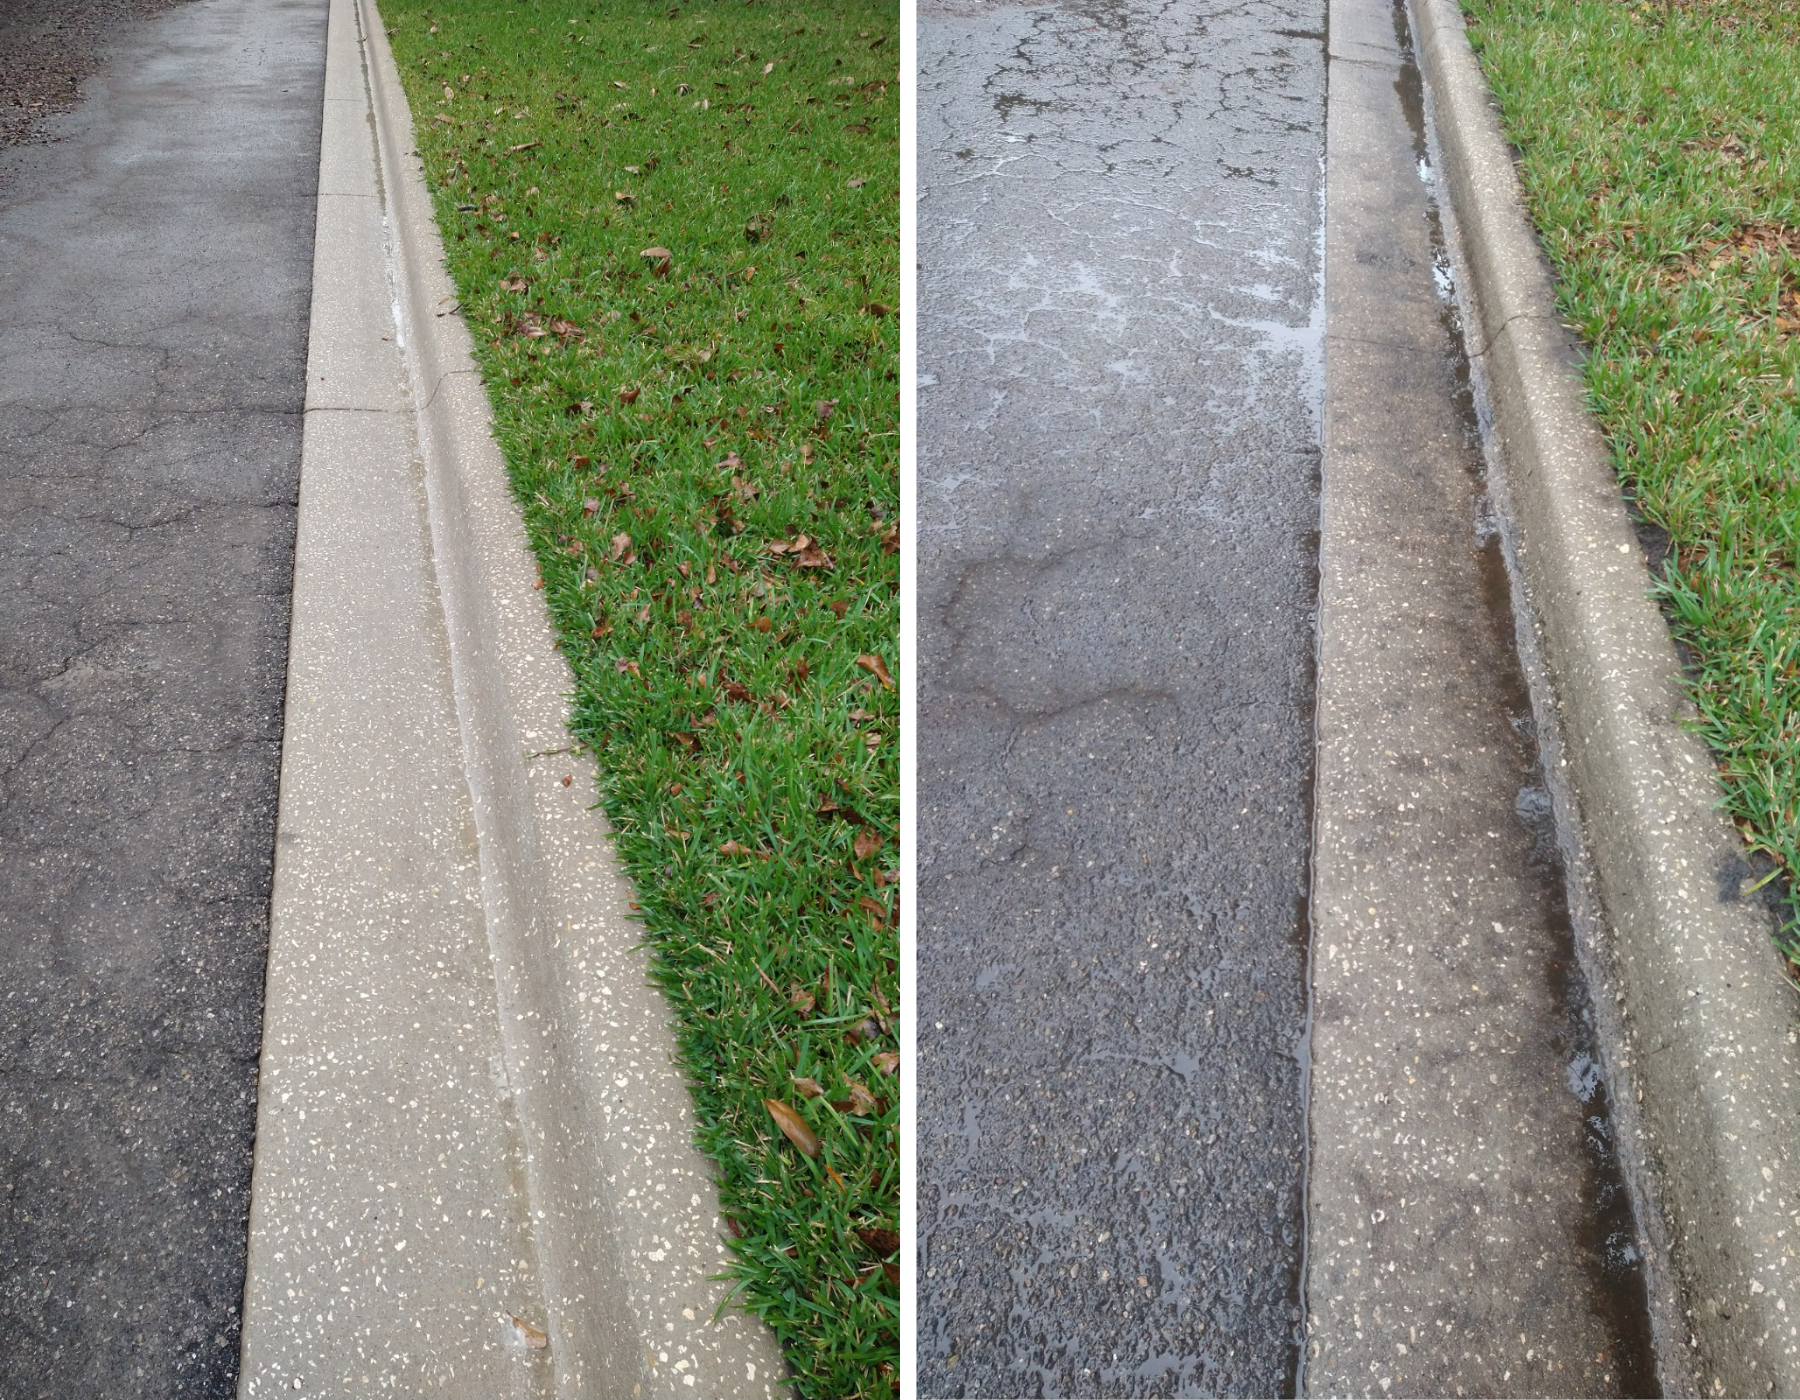 Driveway Pressure Washing - Before After